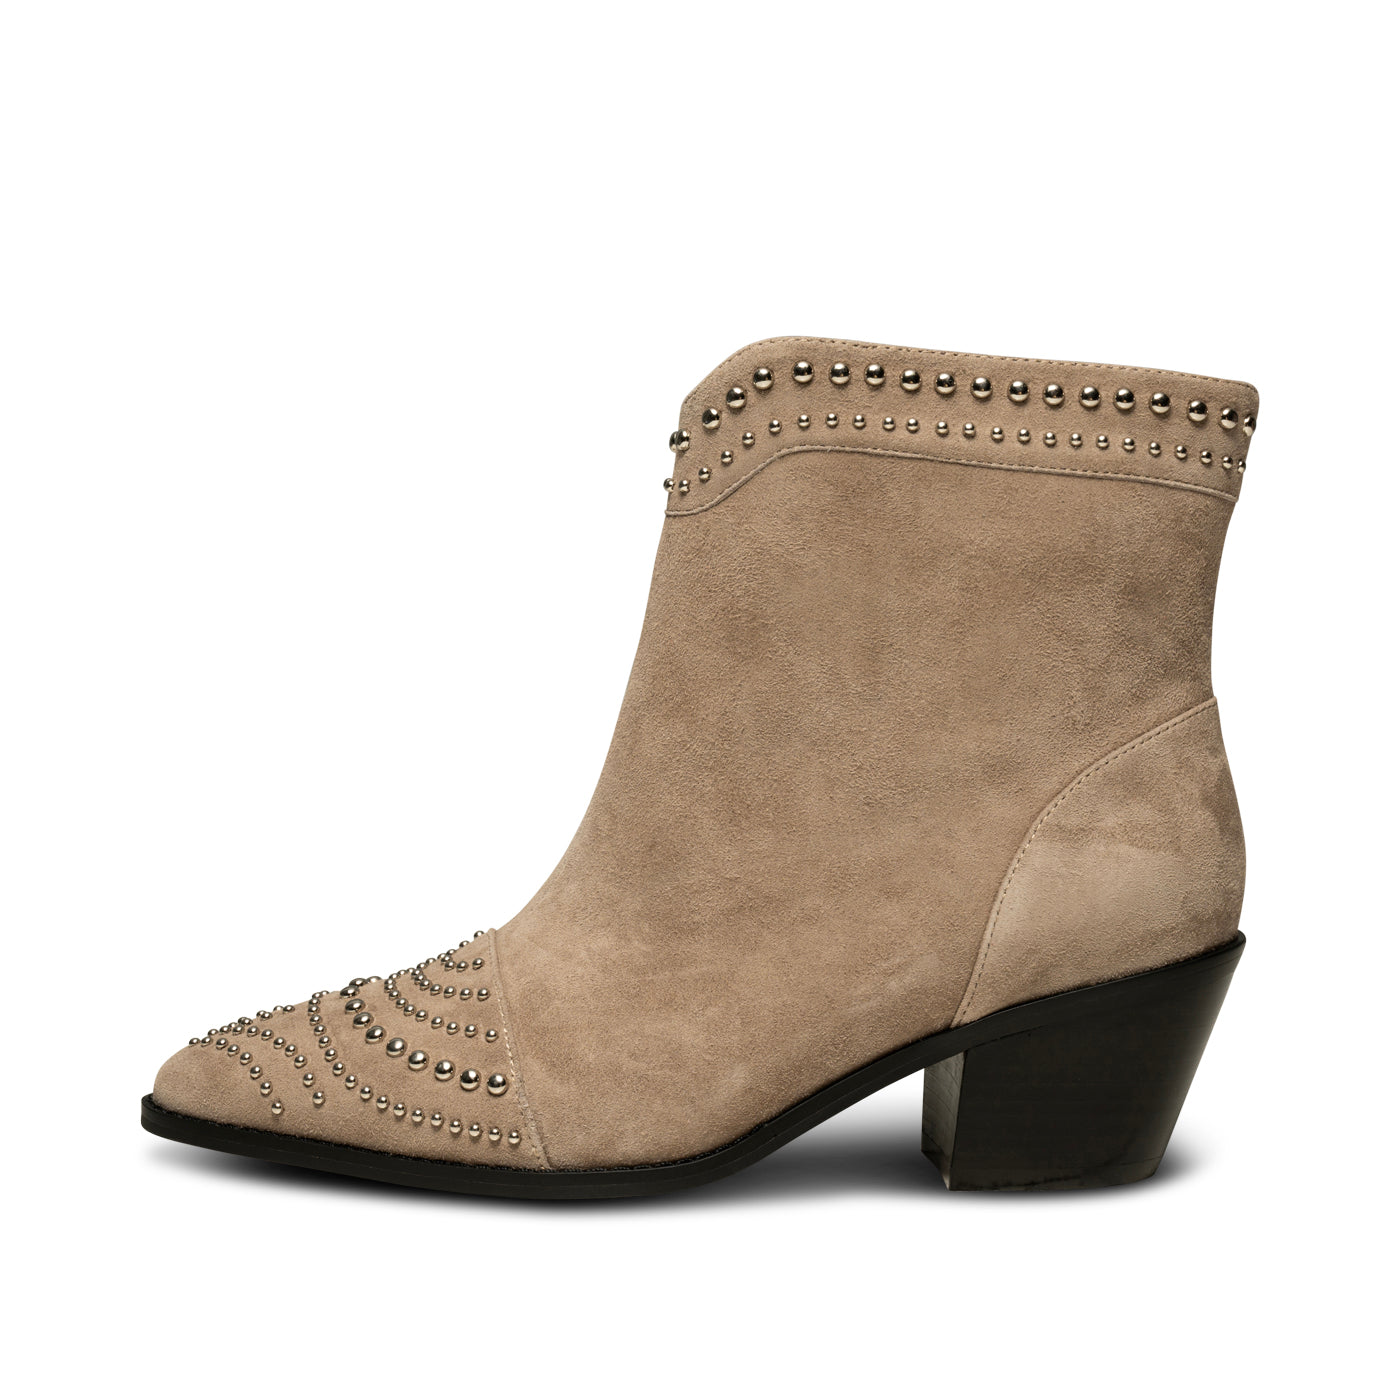 SHOE THE BEAR WOMENS Annika western stud suede Boots 160 TAUPE